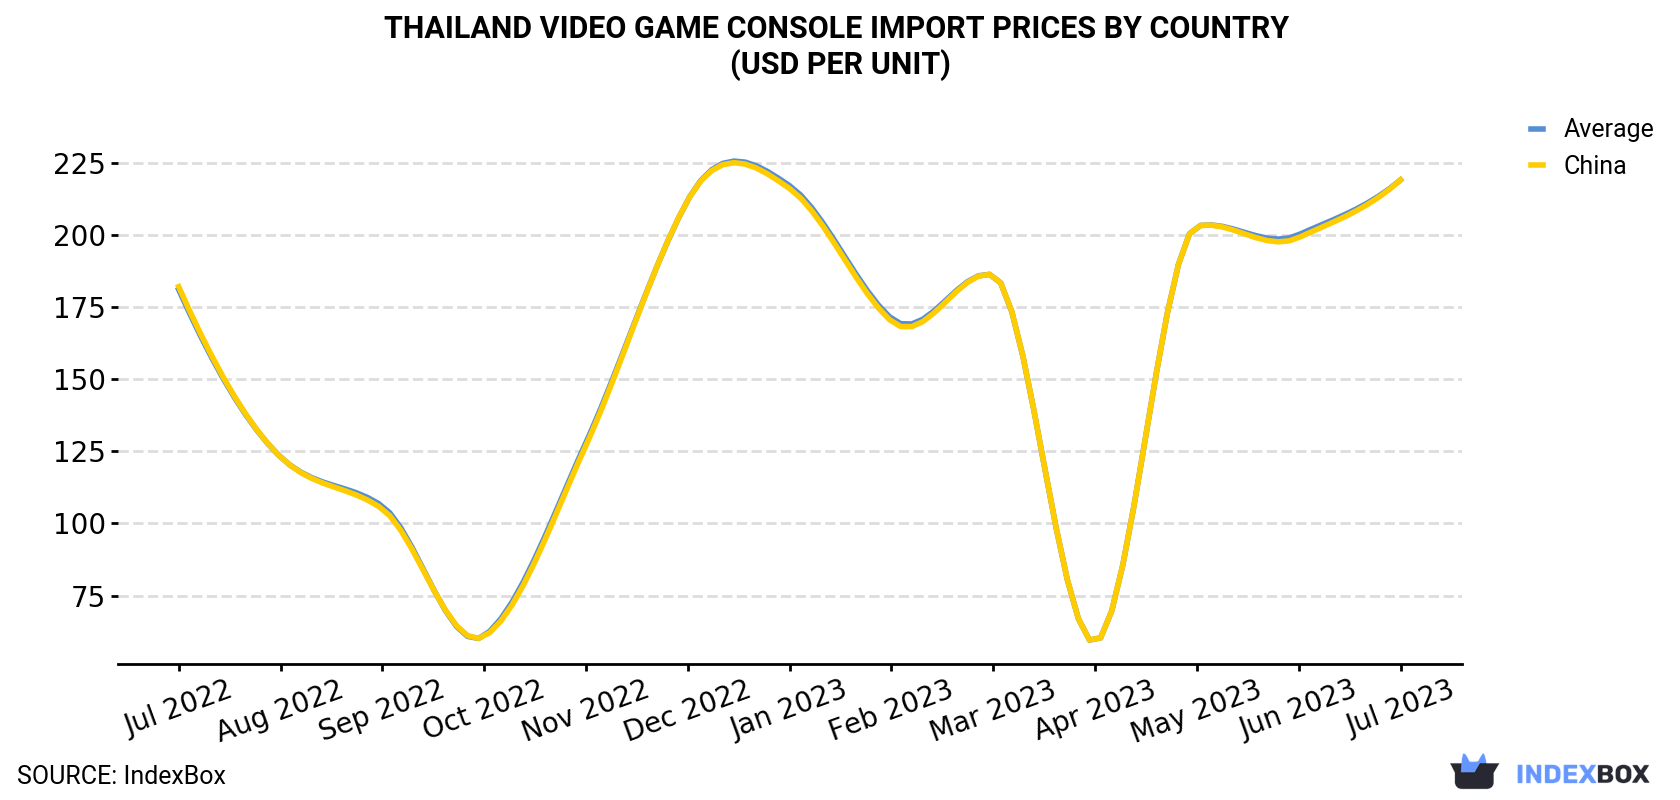 Thailand Video Game Console Import Prices By Country (USD Per Unit)